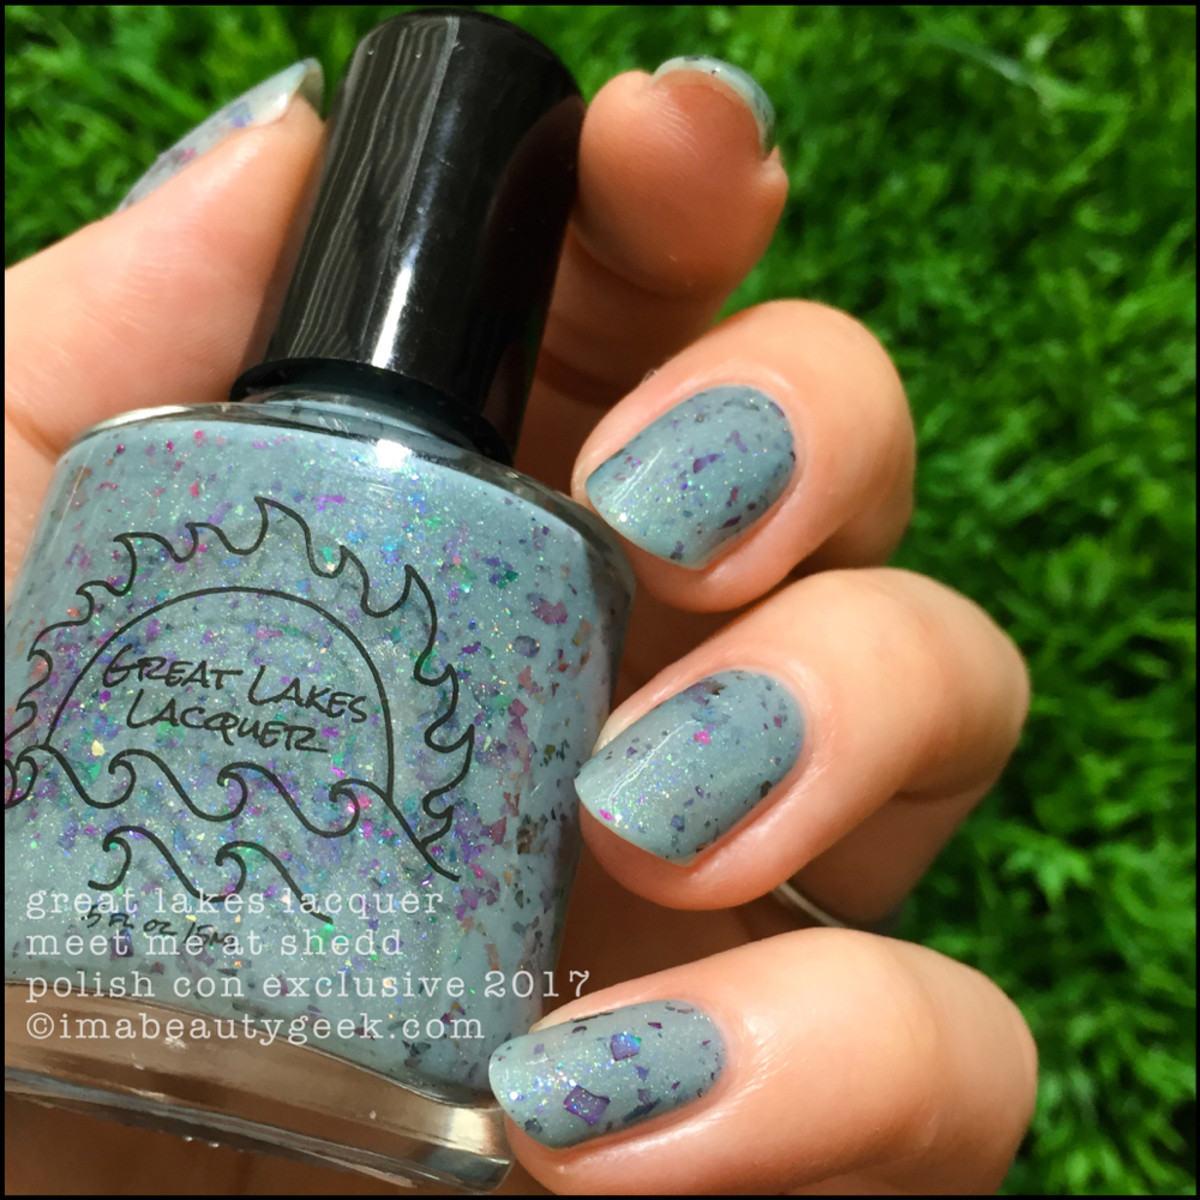 Great Lakes Lacquer Meet Me at Shedd 2 _ Great Lakes Lacquer Polish Con 2017 Limited Editions